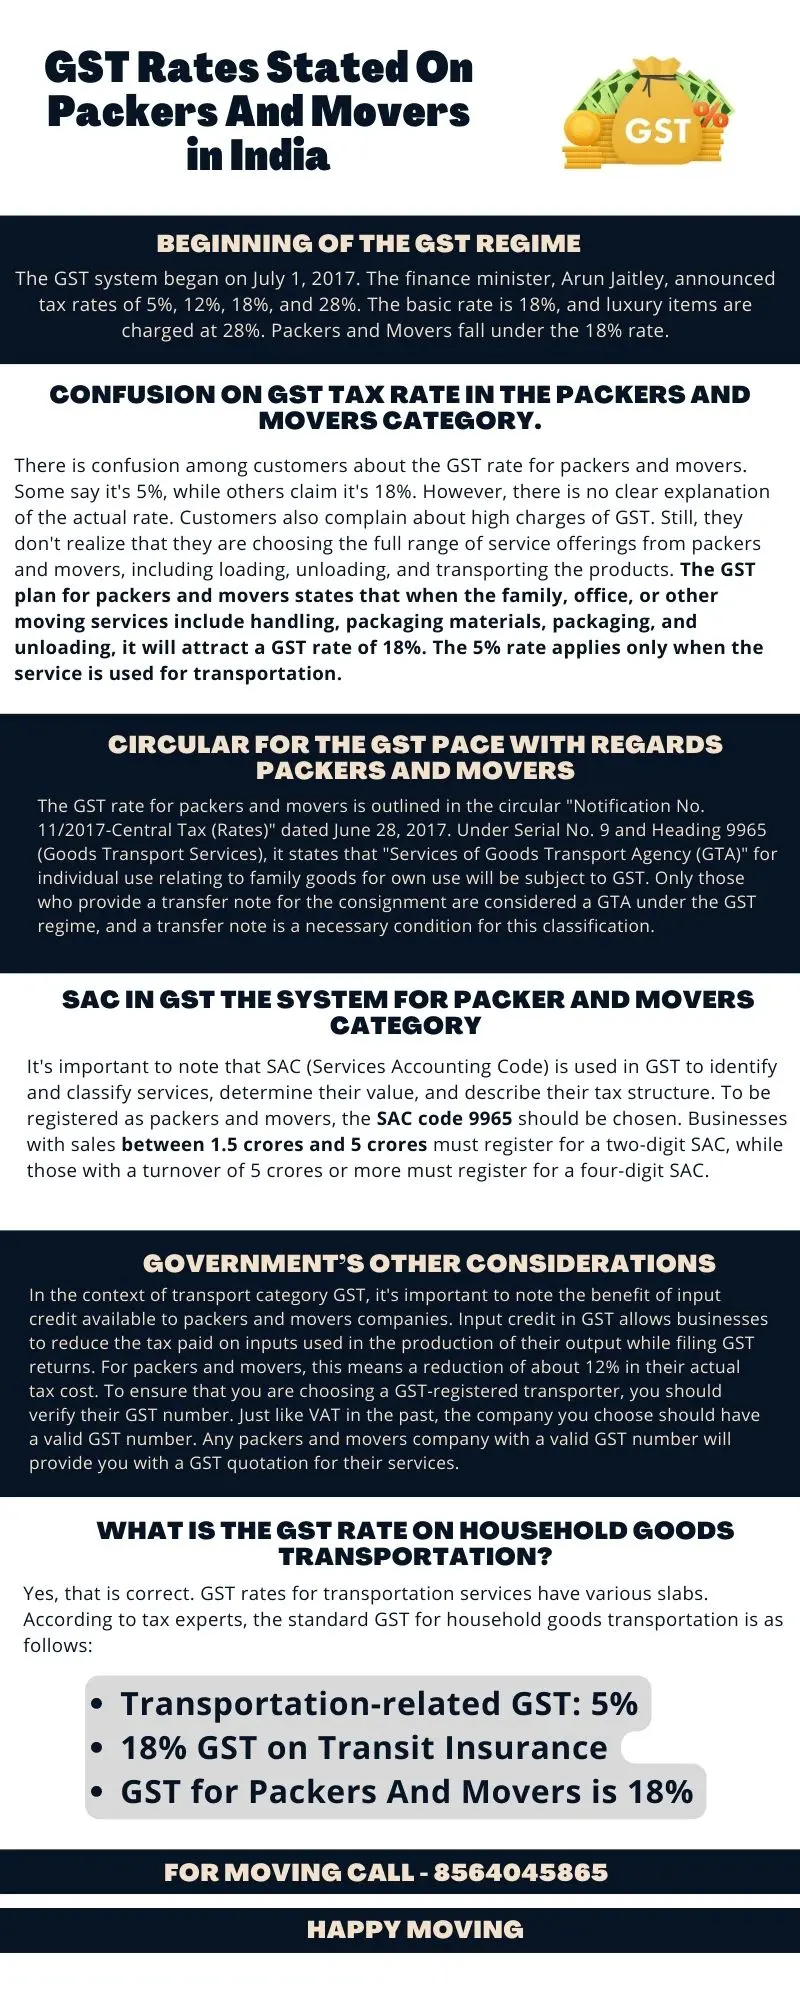 Infographic on GST Rates Stated On Packers And Movers in India